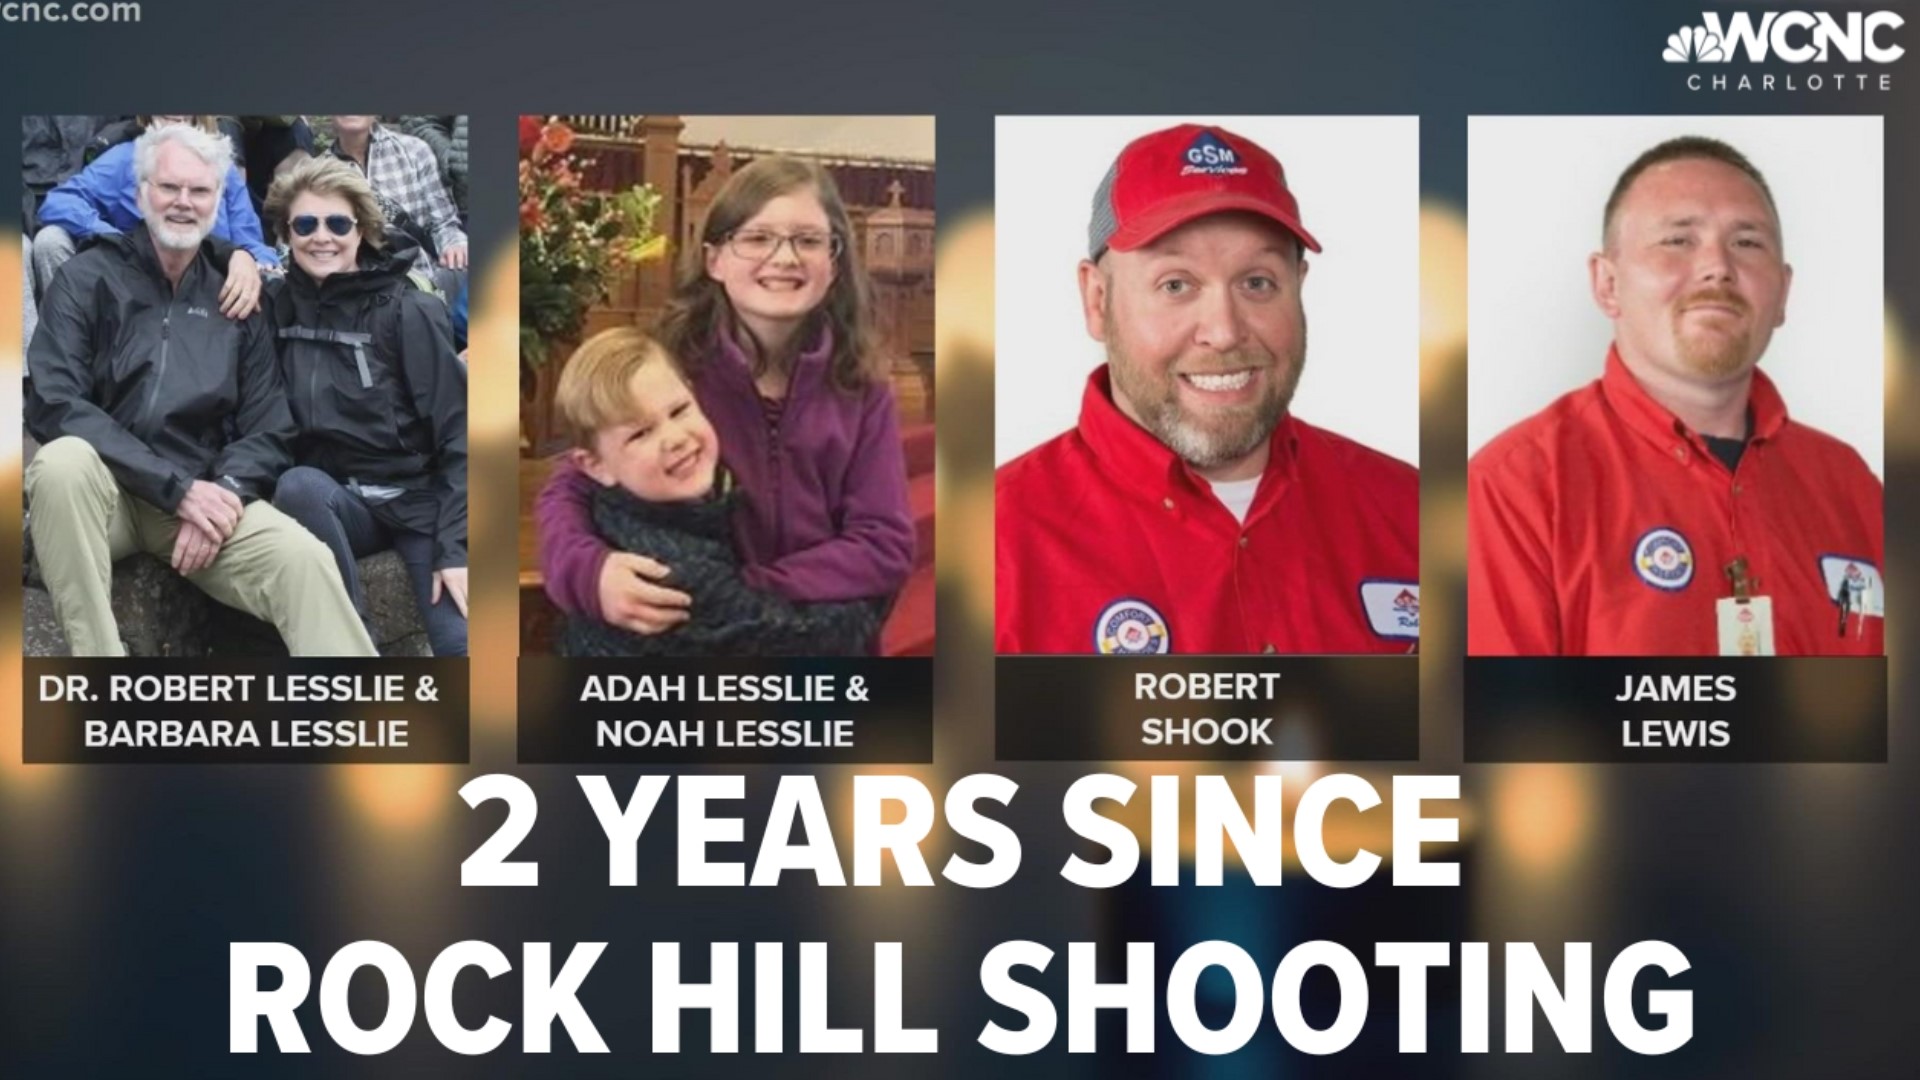 The victims were Dr. Robert Lesslie, his wife, Barbara Lesslie, their two grandchildren -- Adah, 9, and Noah, 5 -- as well as James Lewis and Robert Shook.